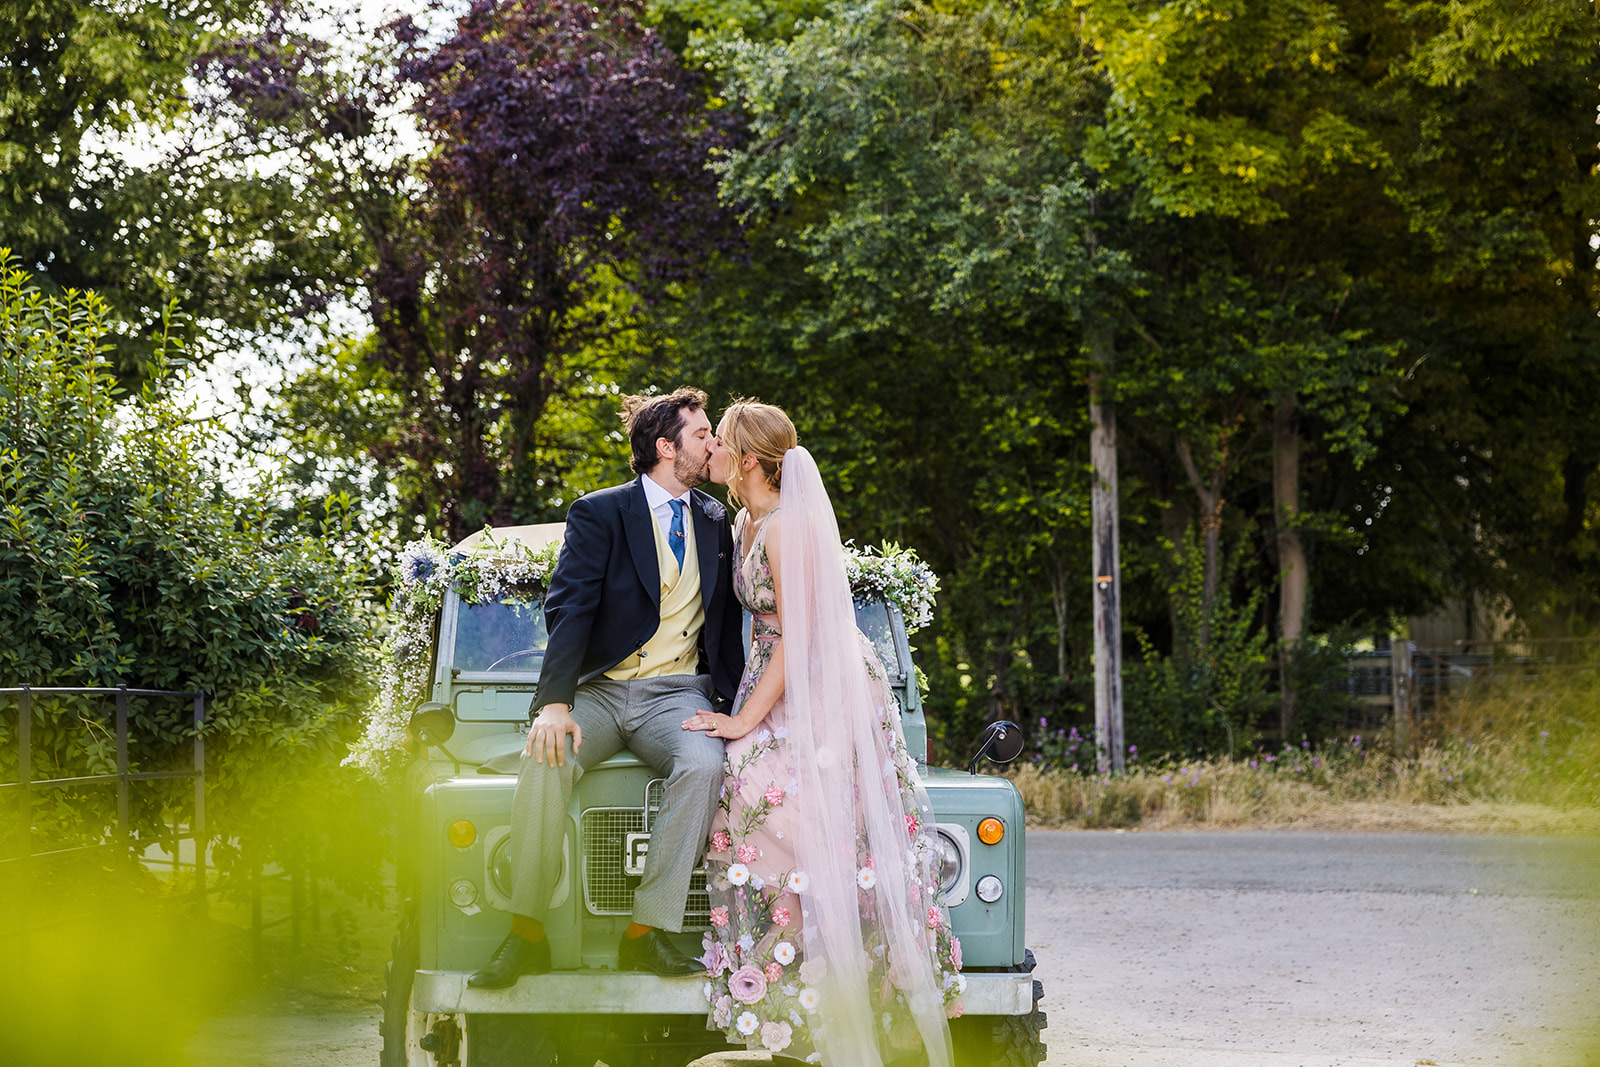 A wedding couple sitting on an antique landrover kissing